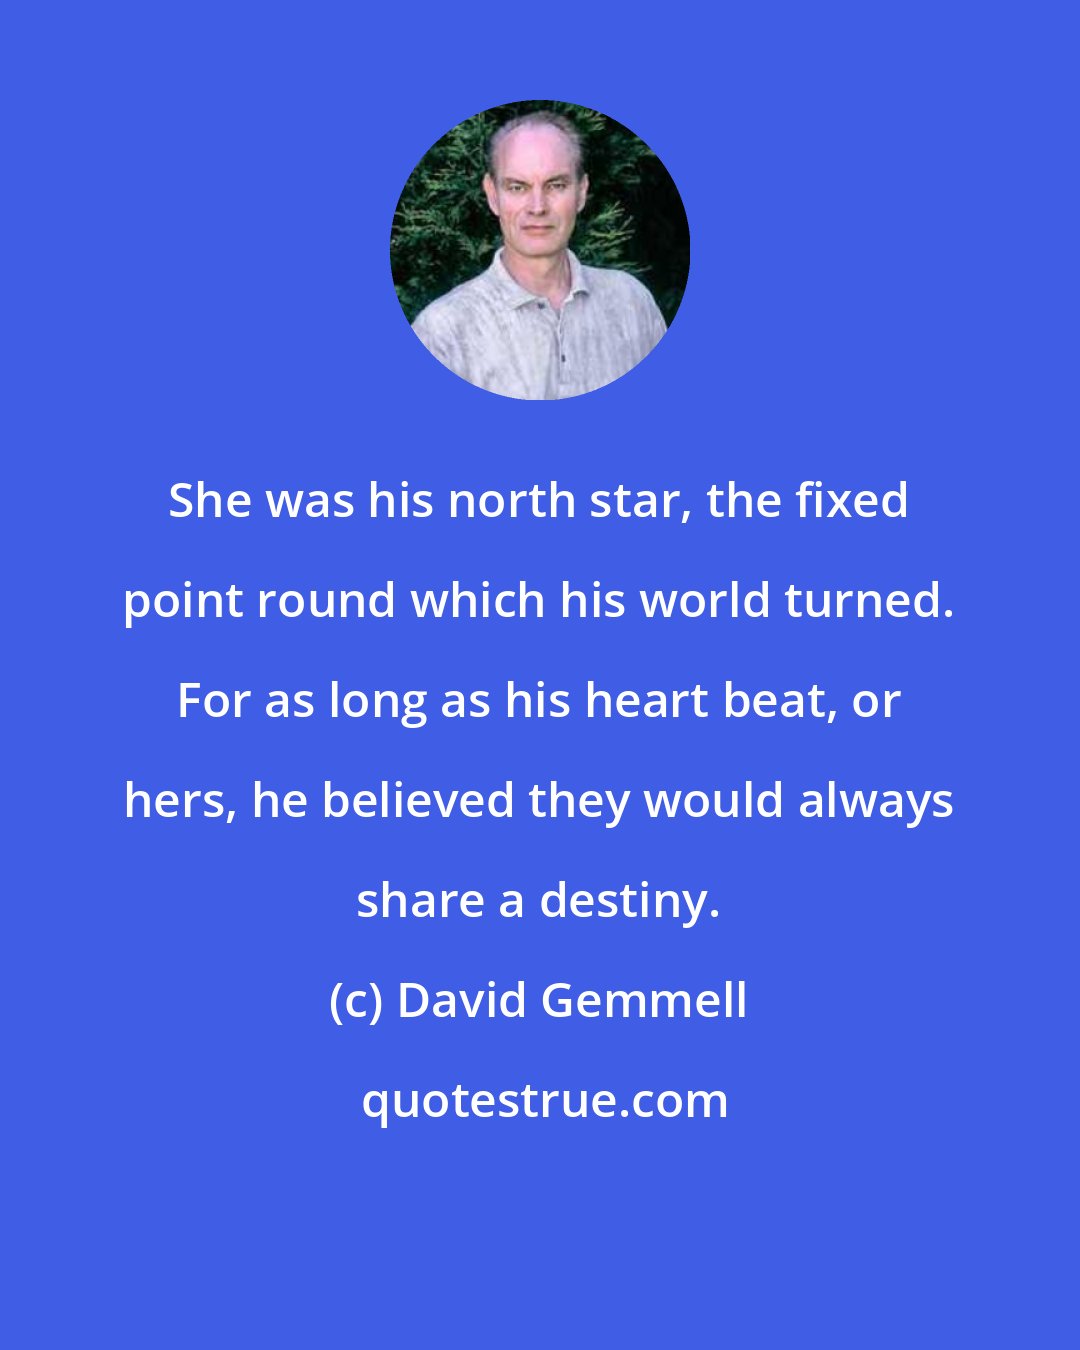 David Gemmell: She was his north star, the fixed point round which his world turned. For as long as his heart beat, or hers, he believed they would always share a destiny.